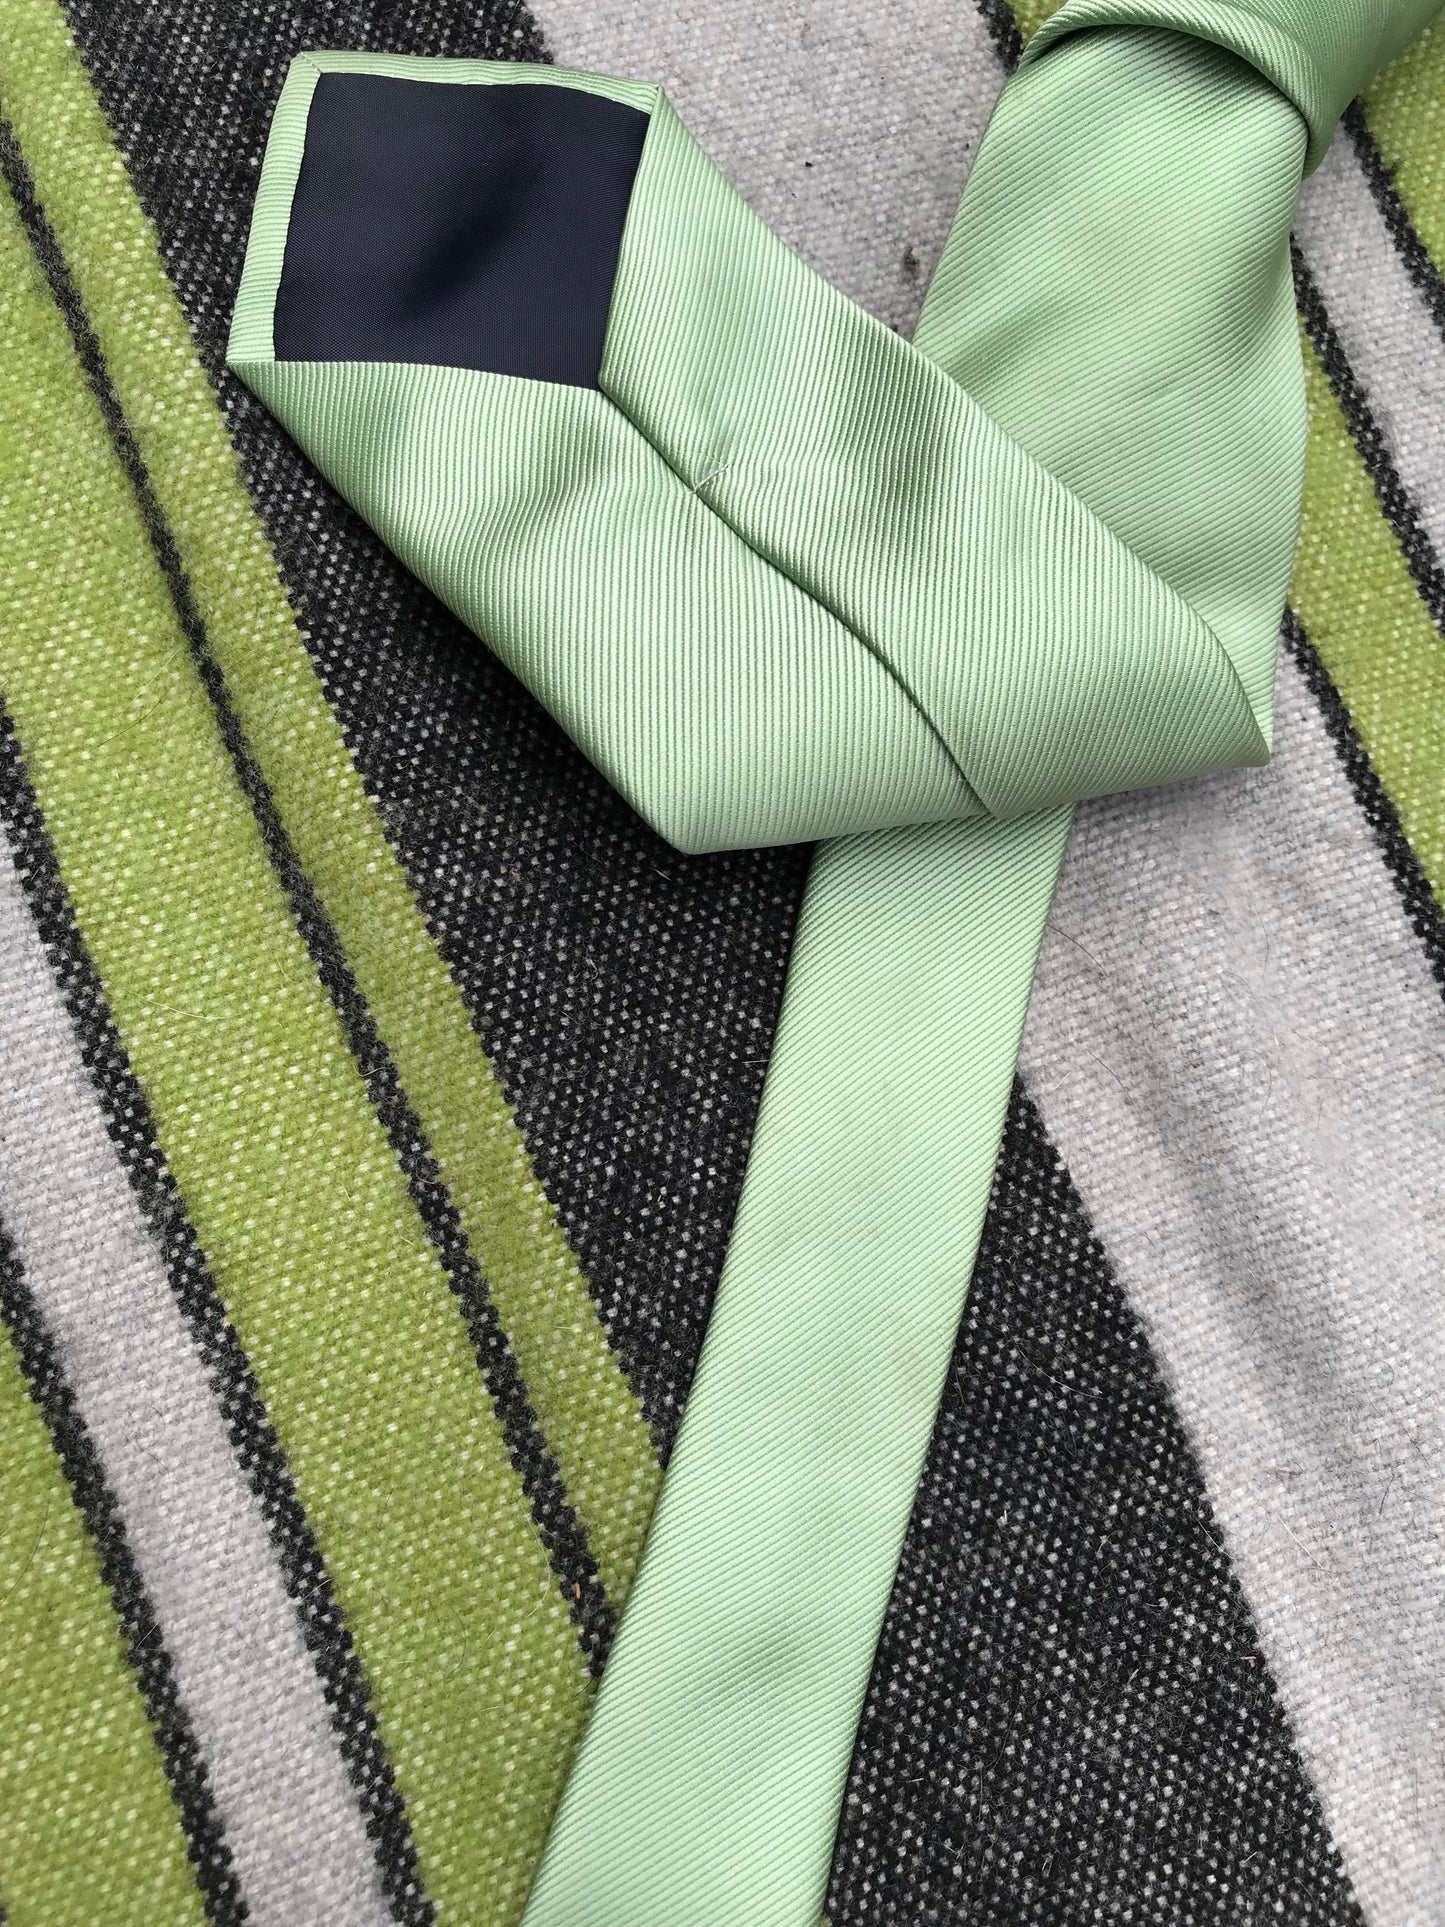 Marks and Spencer's  Light green show tie FREE POSTAGE ■